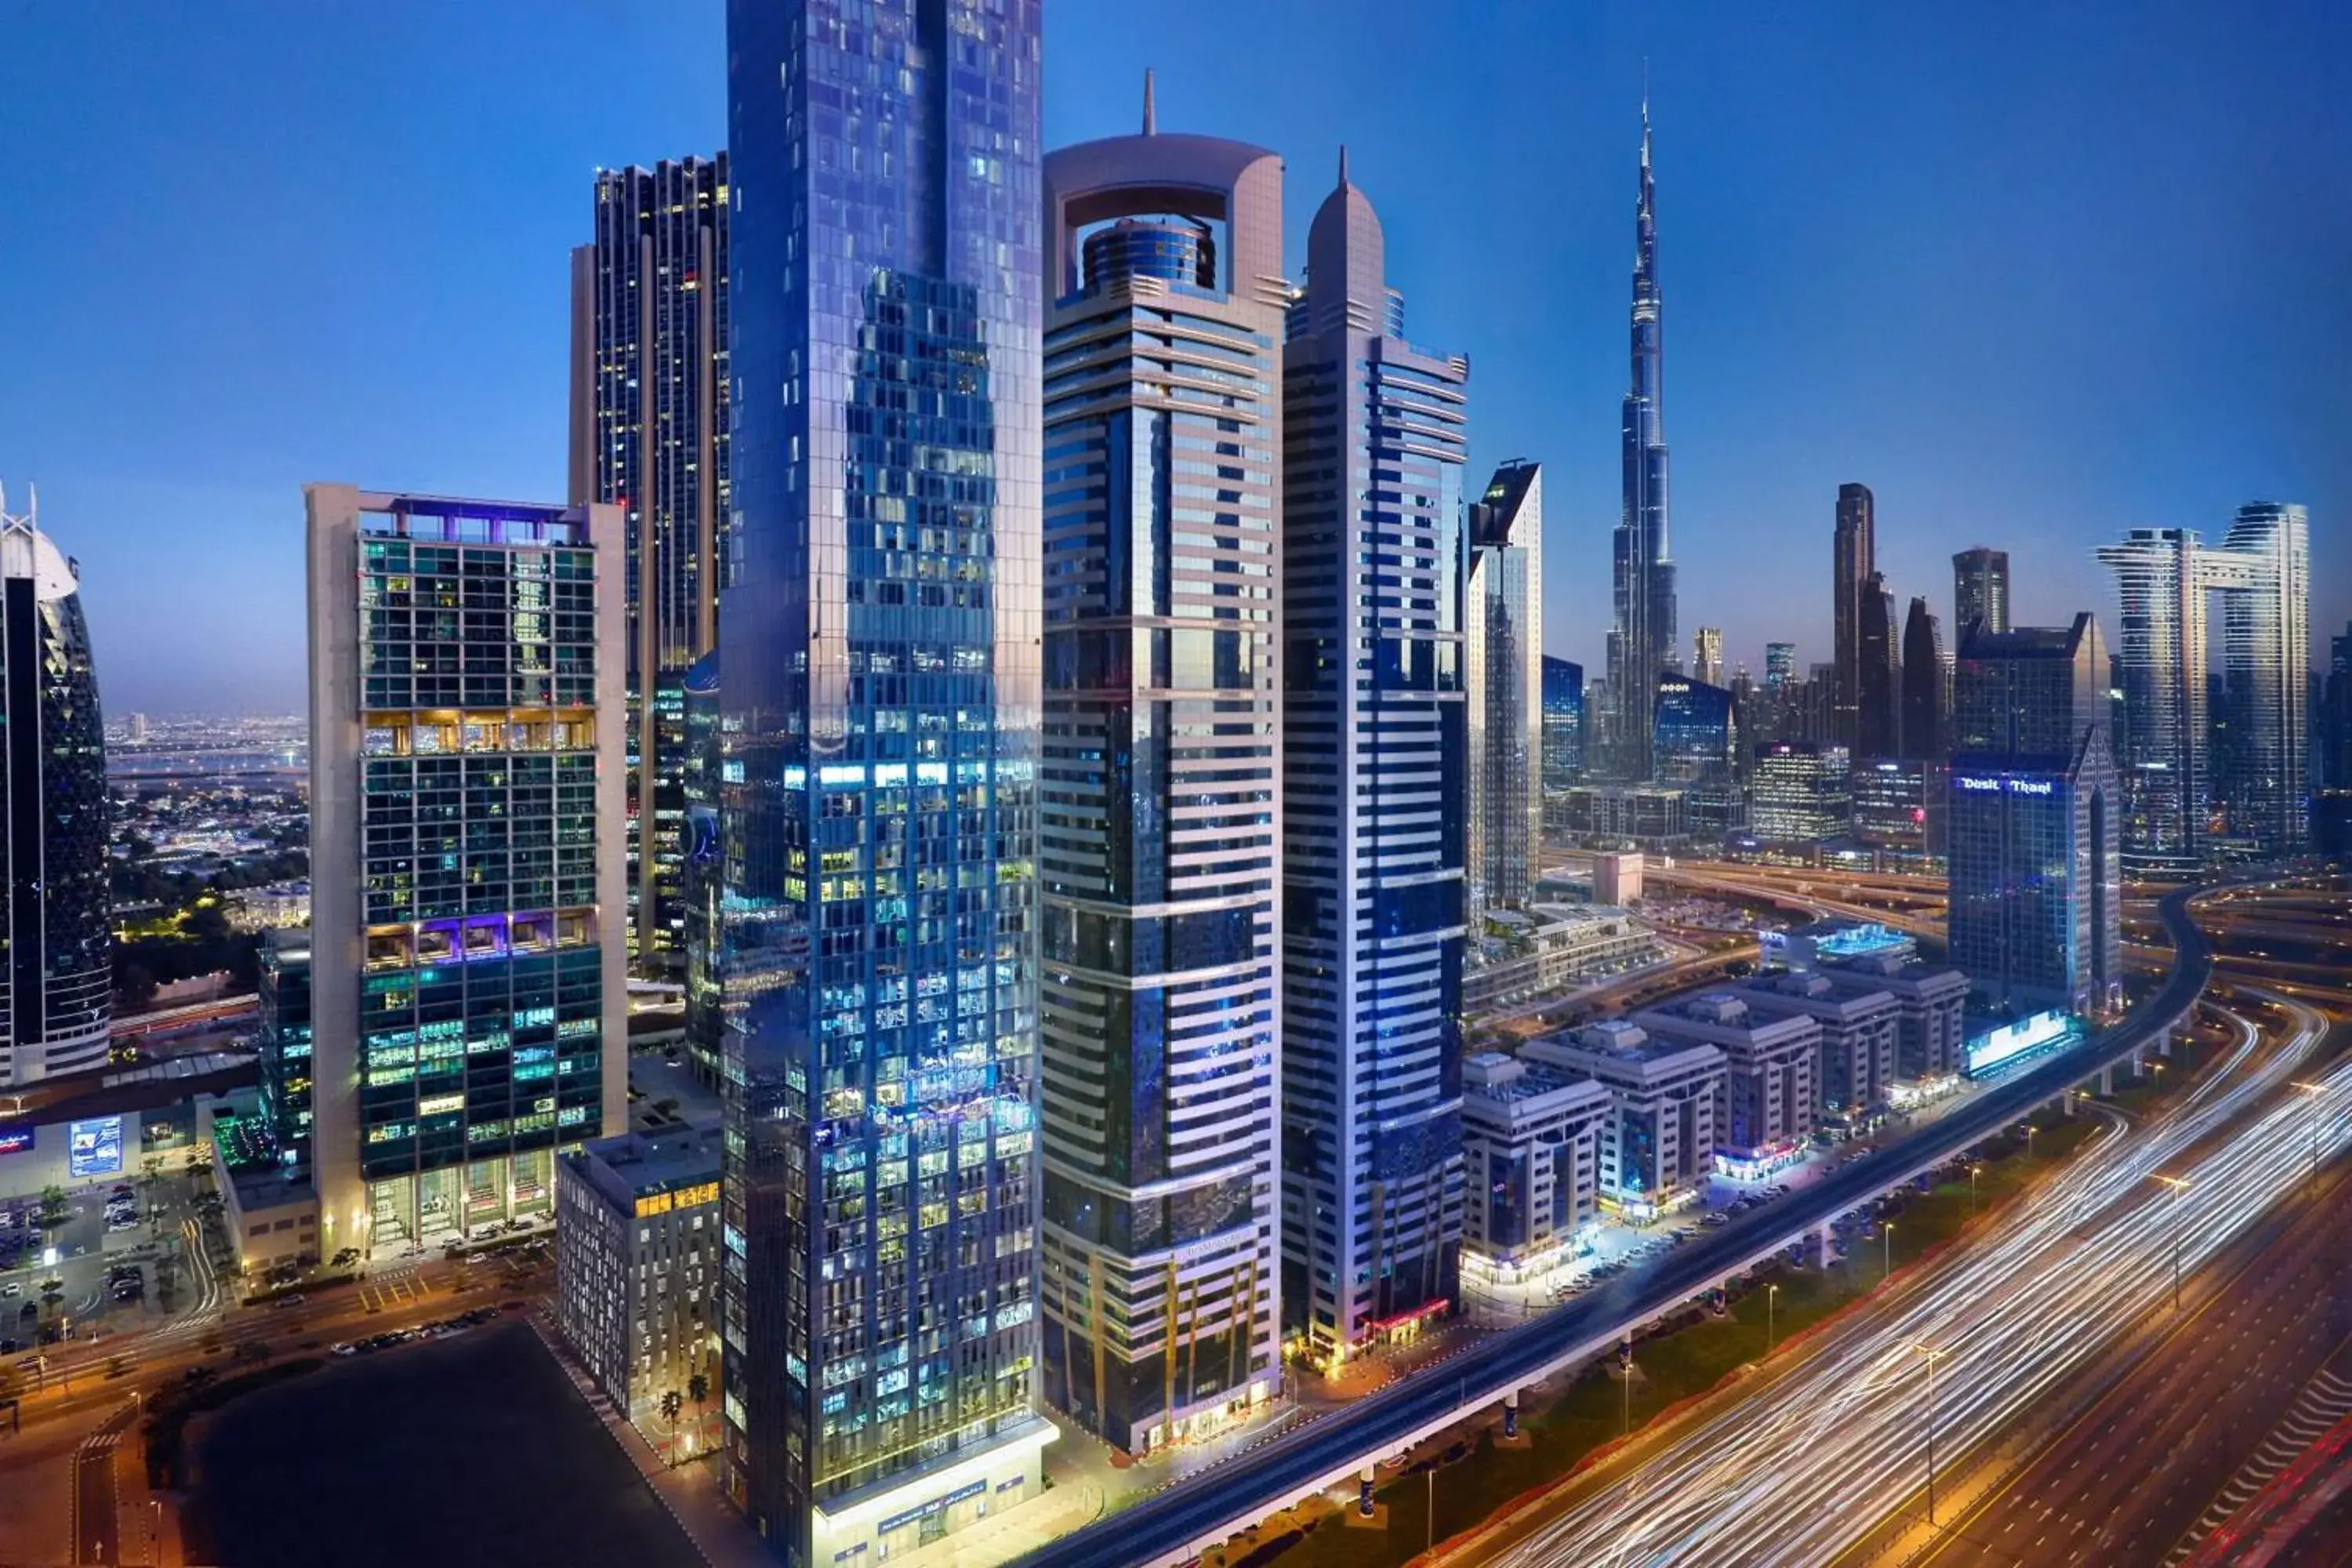 Property building in Residence Inn by Marriott Sheikh Zayed Road, Dubai